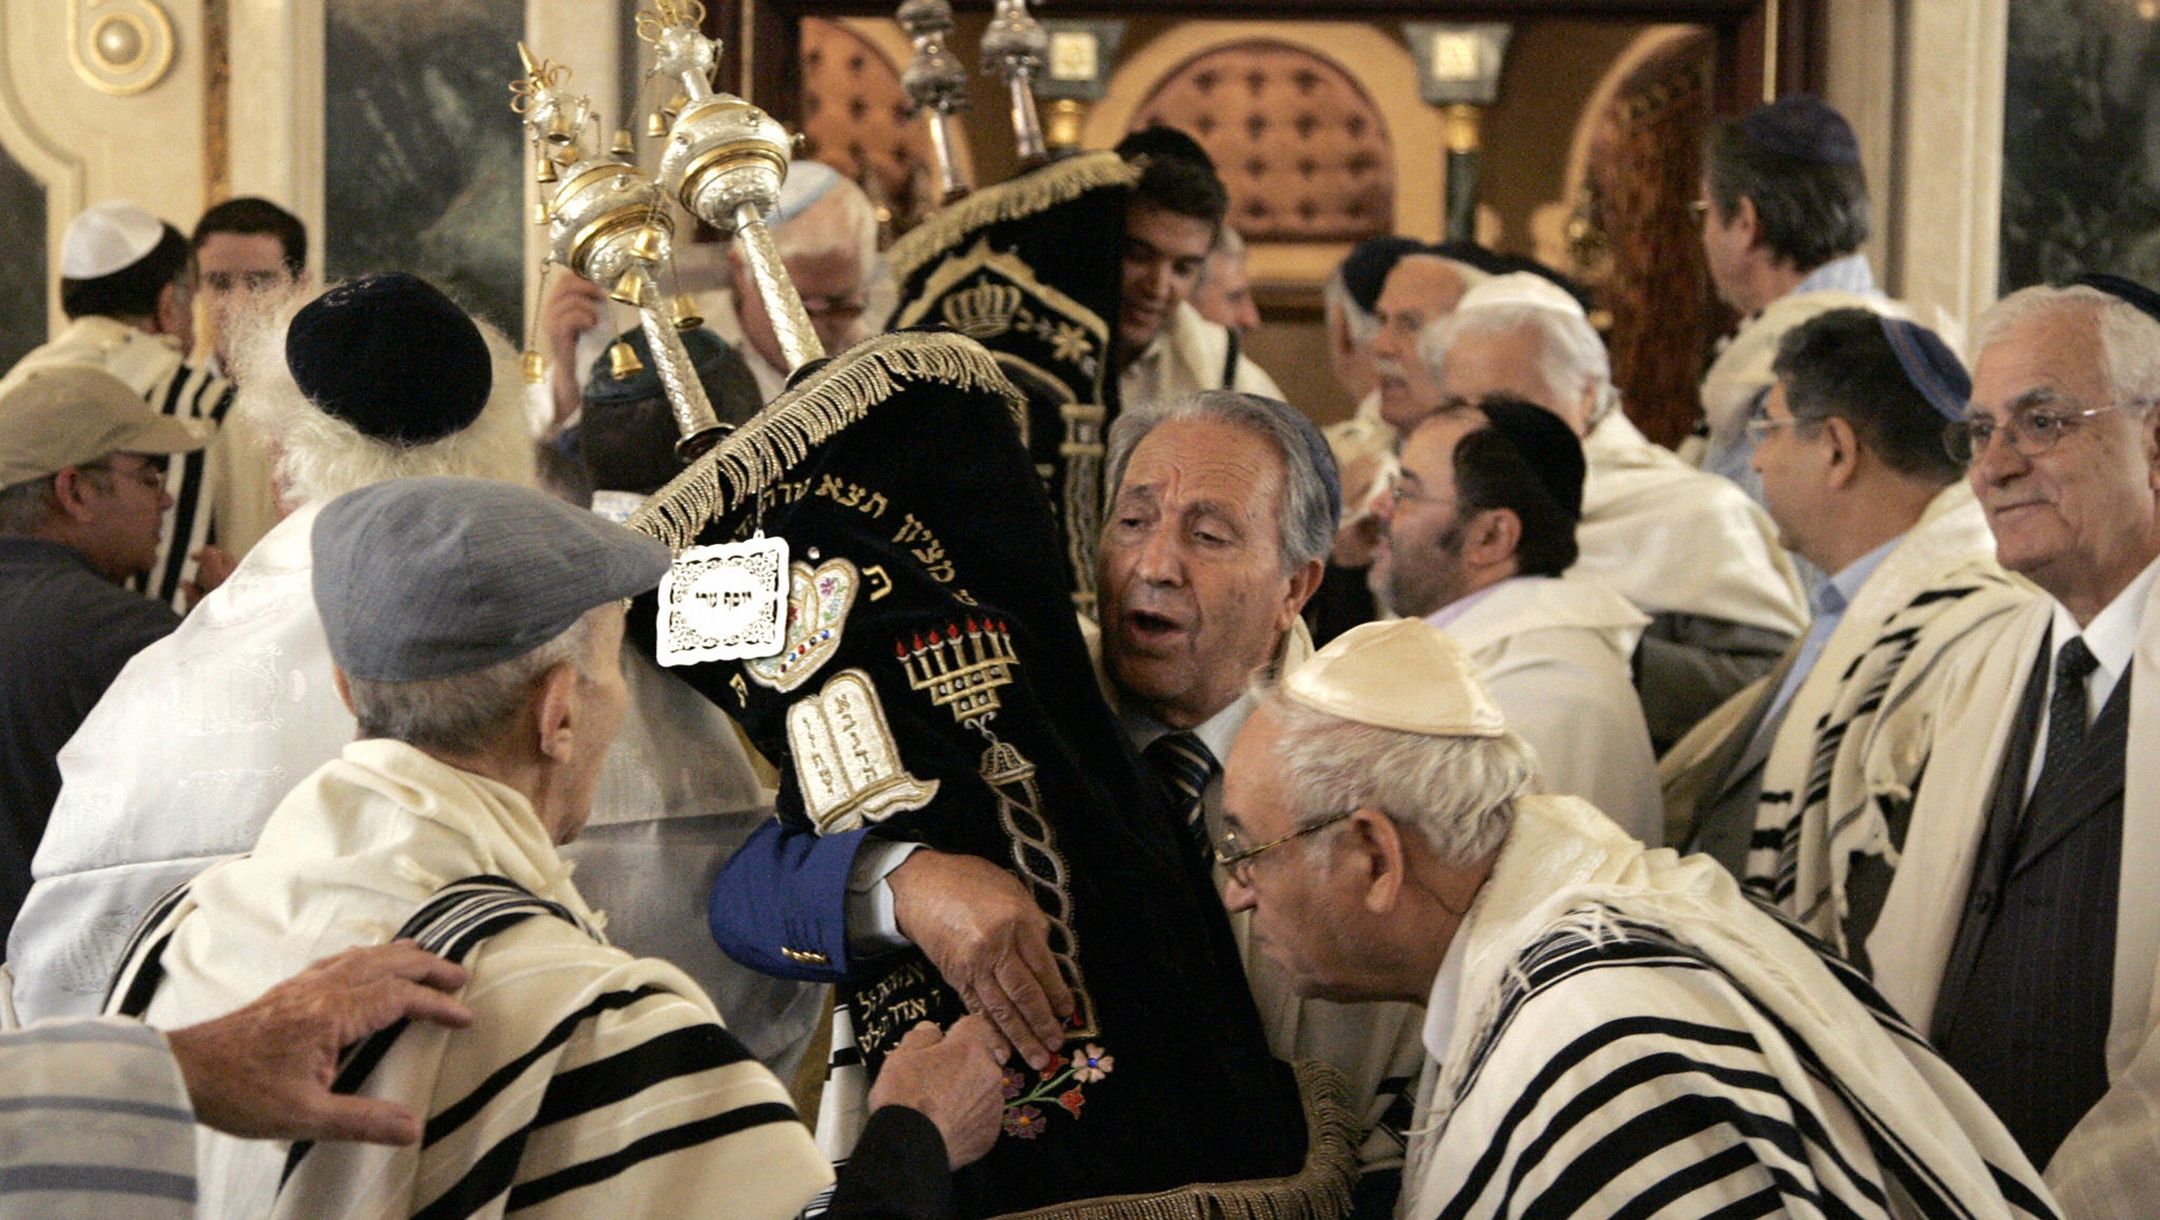 Members of Morocco’s Jewish community kiss Torah scrolls at Simchat Torah at the Great Synagogue of Casablanca, Morocco on Oct. 5, 2007. (Abdelhak Senna/AFP via Getty Images)